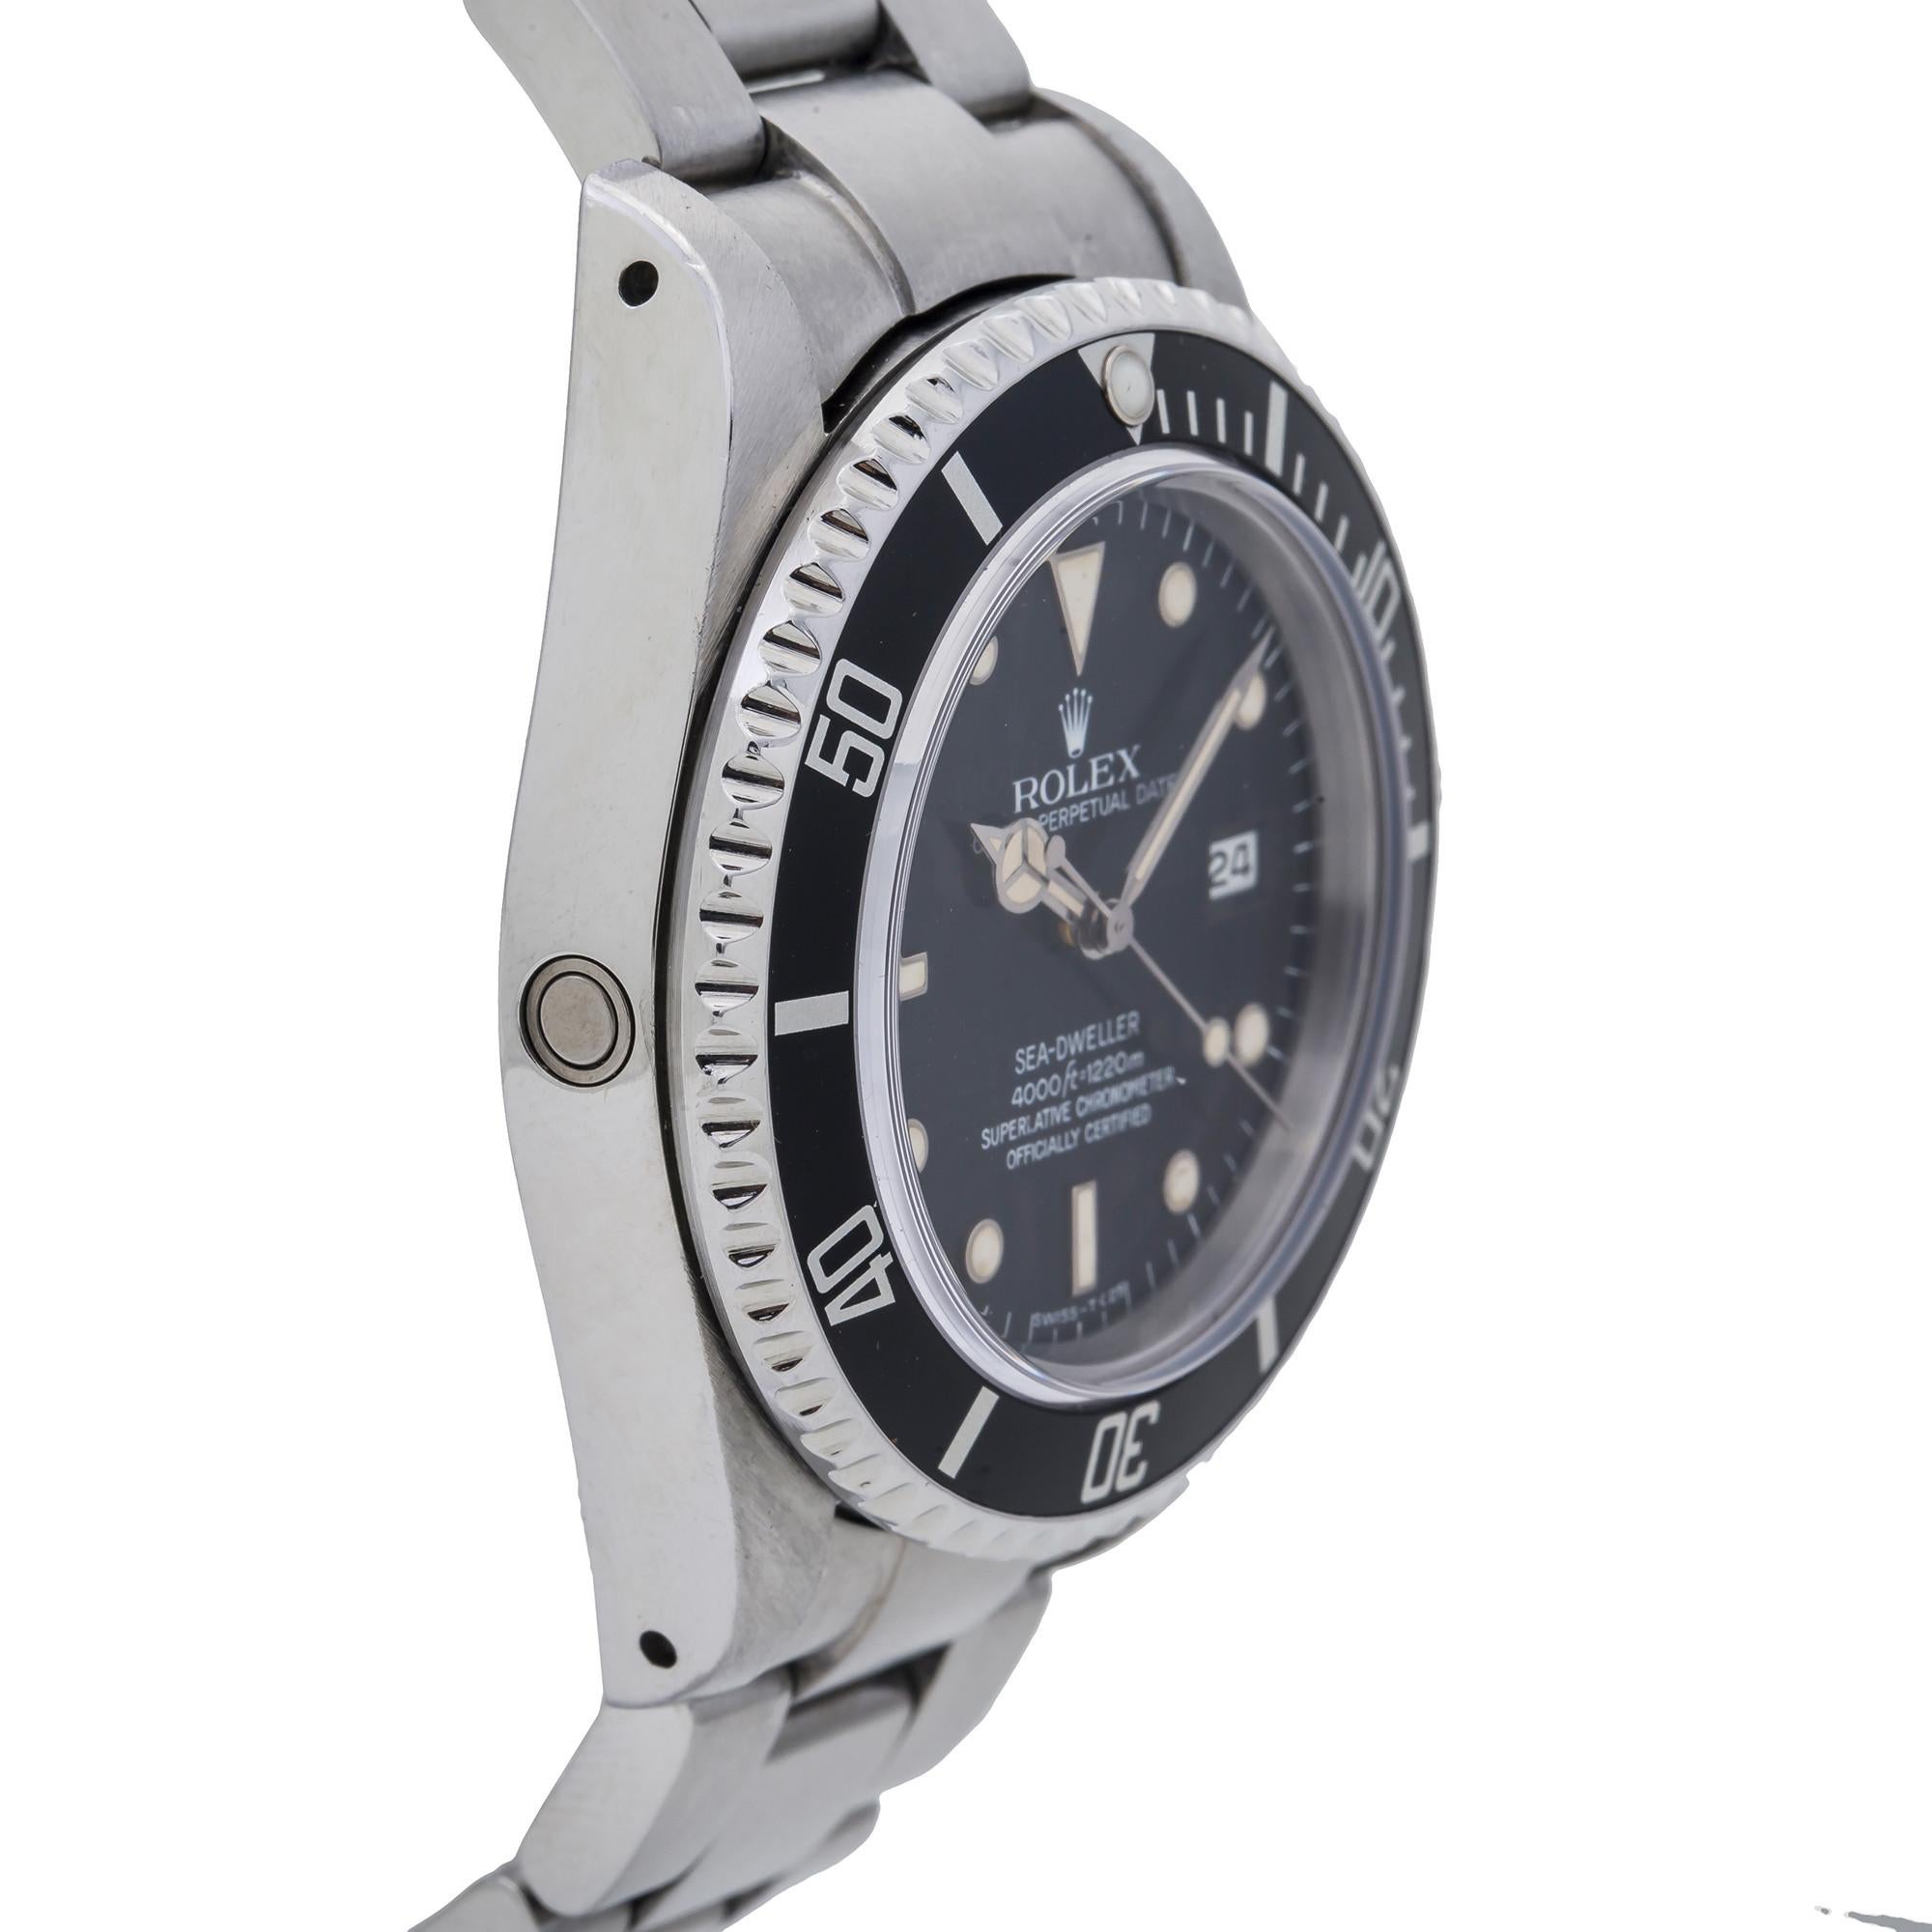 Rolex Sea-Dweller 16660, Black Dial, Certified and Warranty In Excellent Condition For Sale In Miami, FL